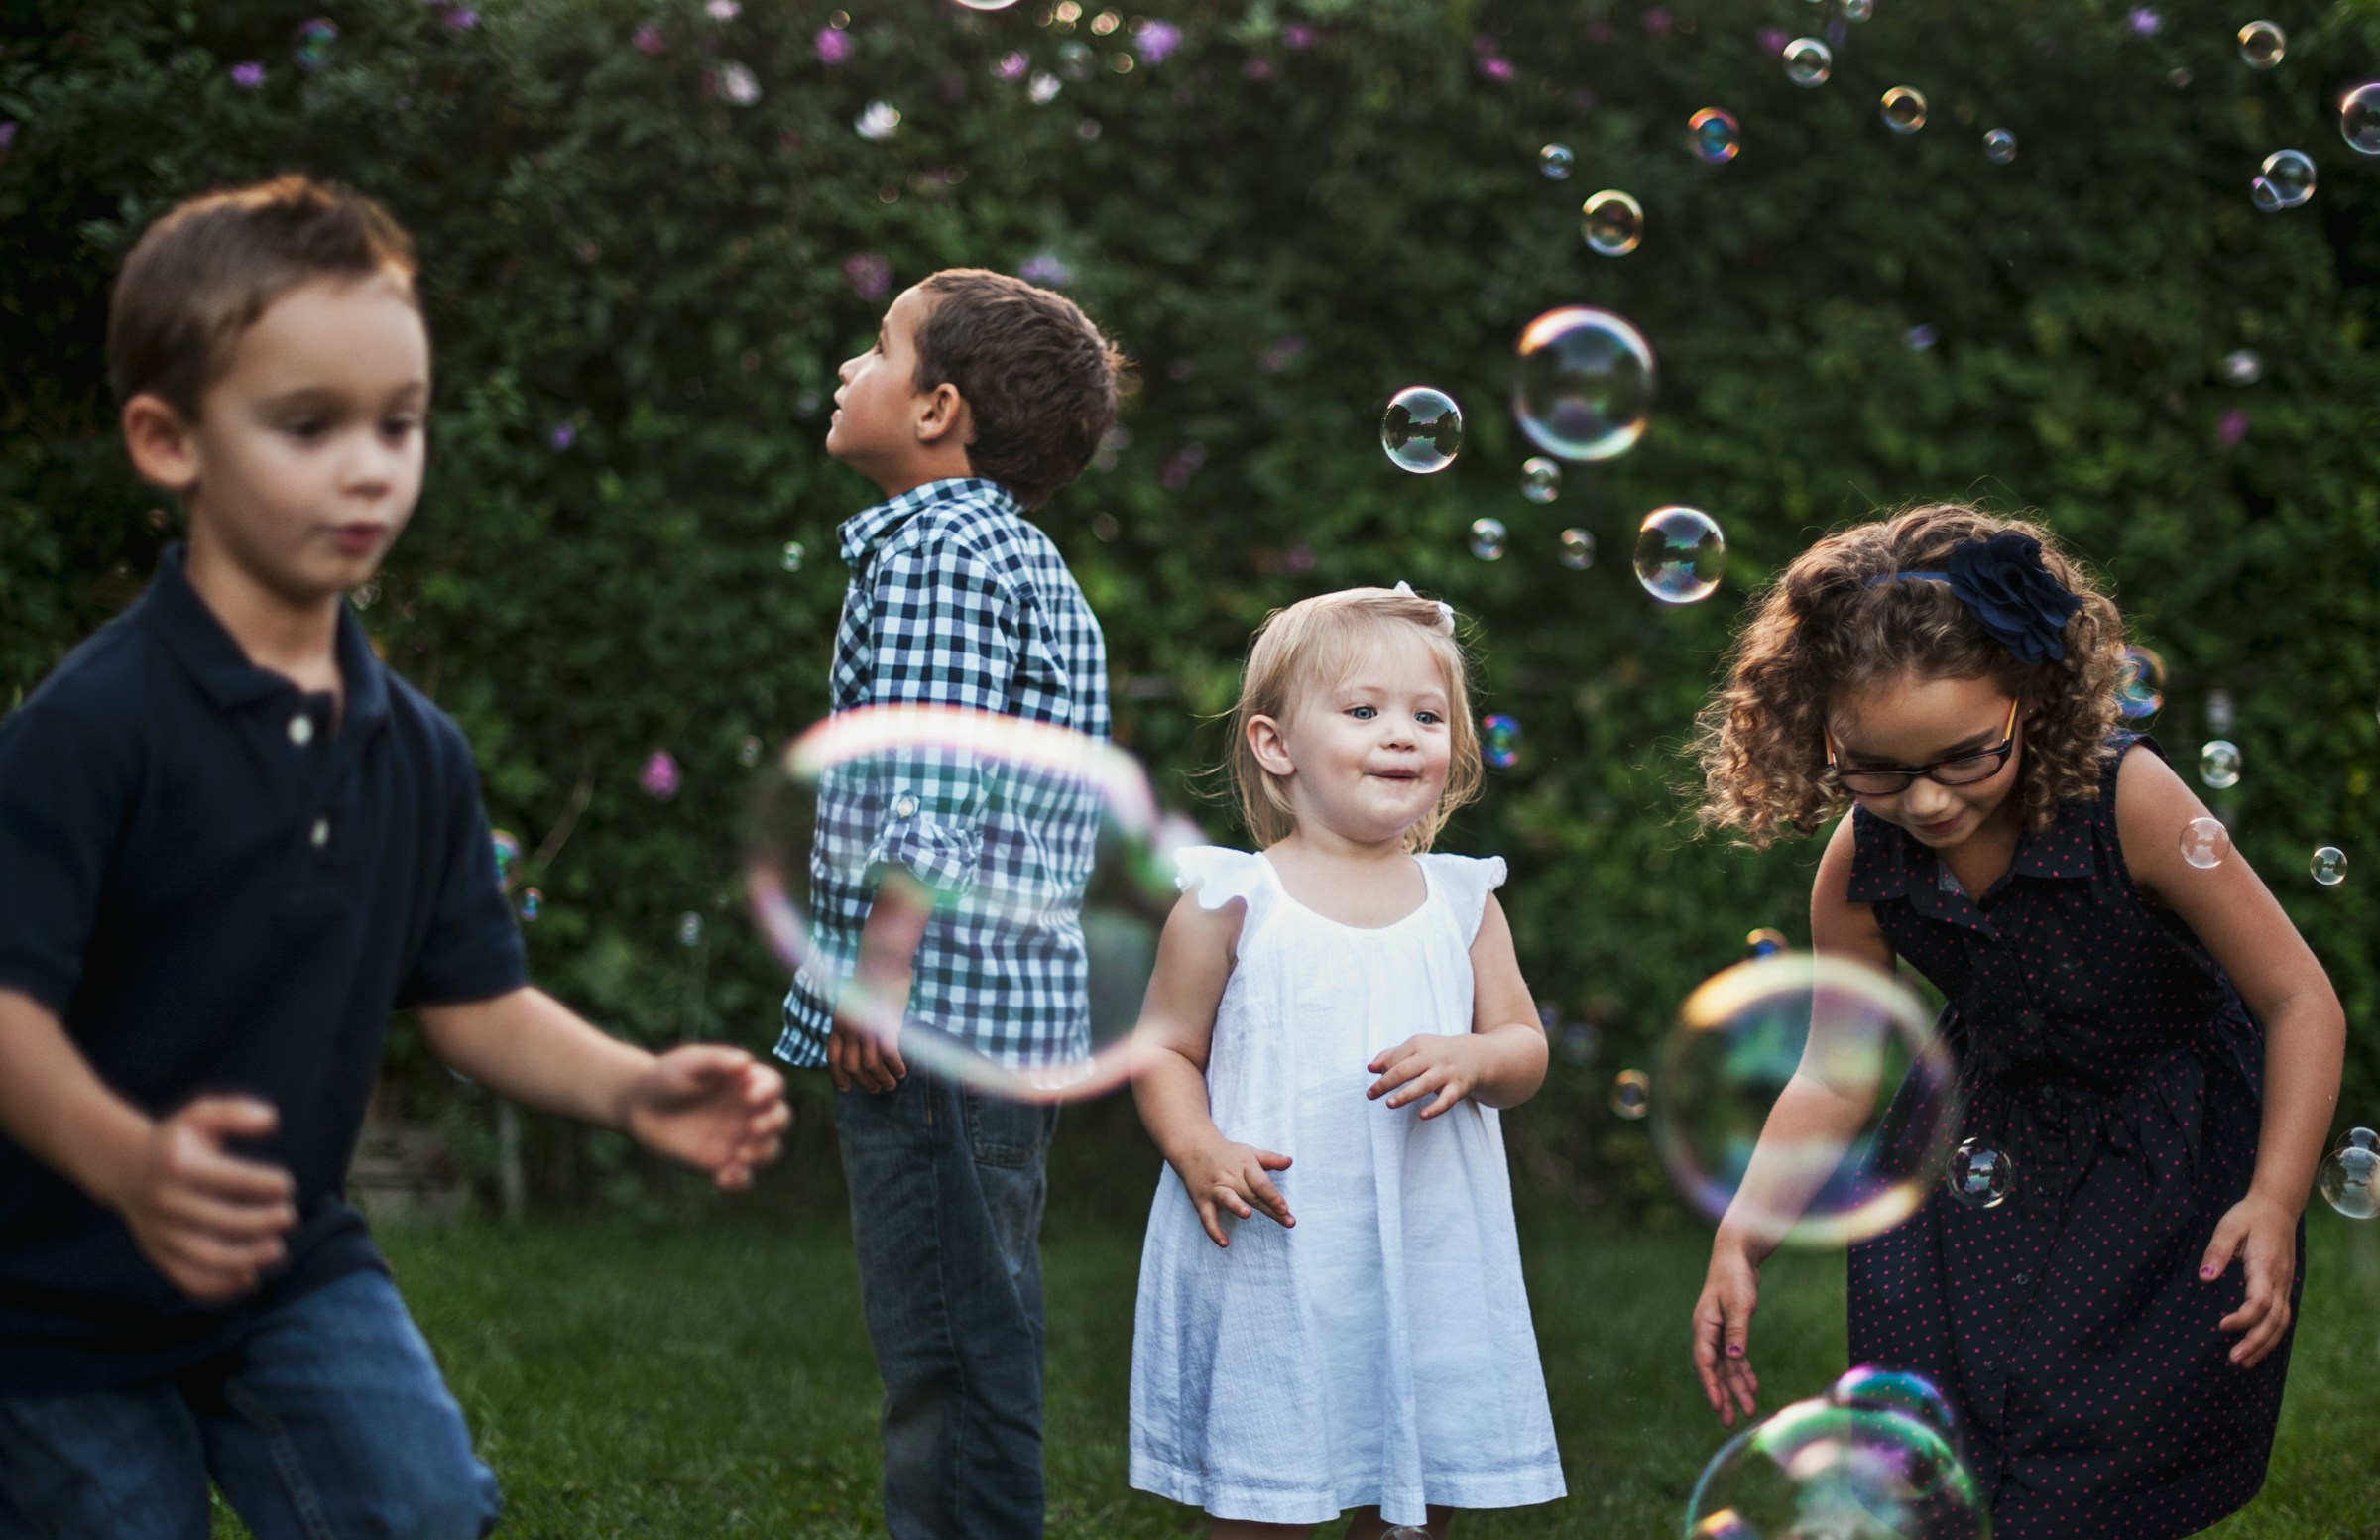 Children playing with bubbles outdoors | Source: Unsplash